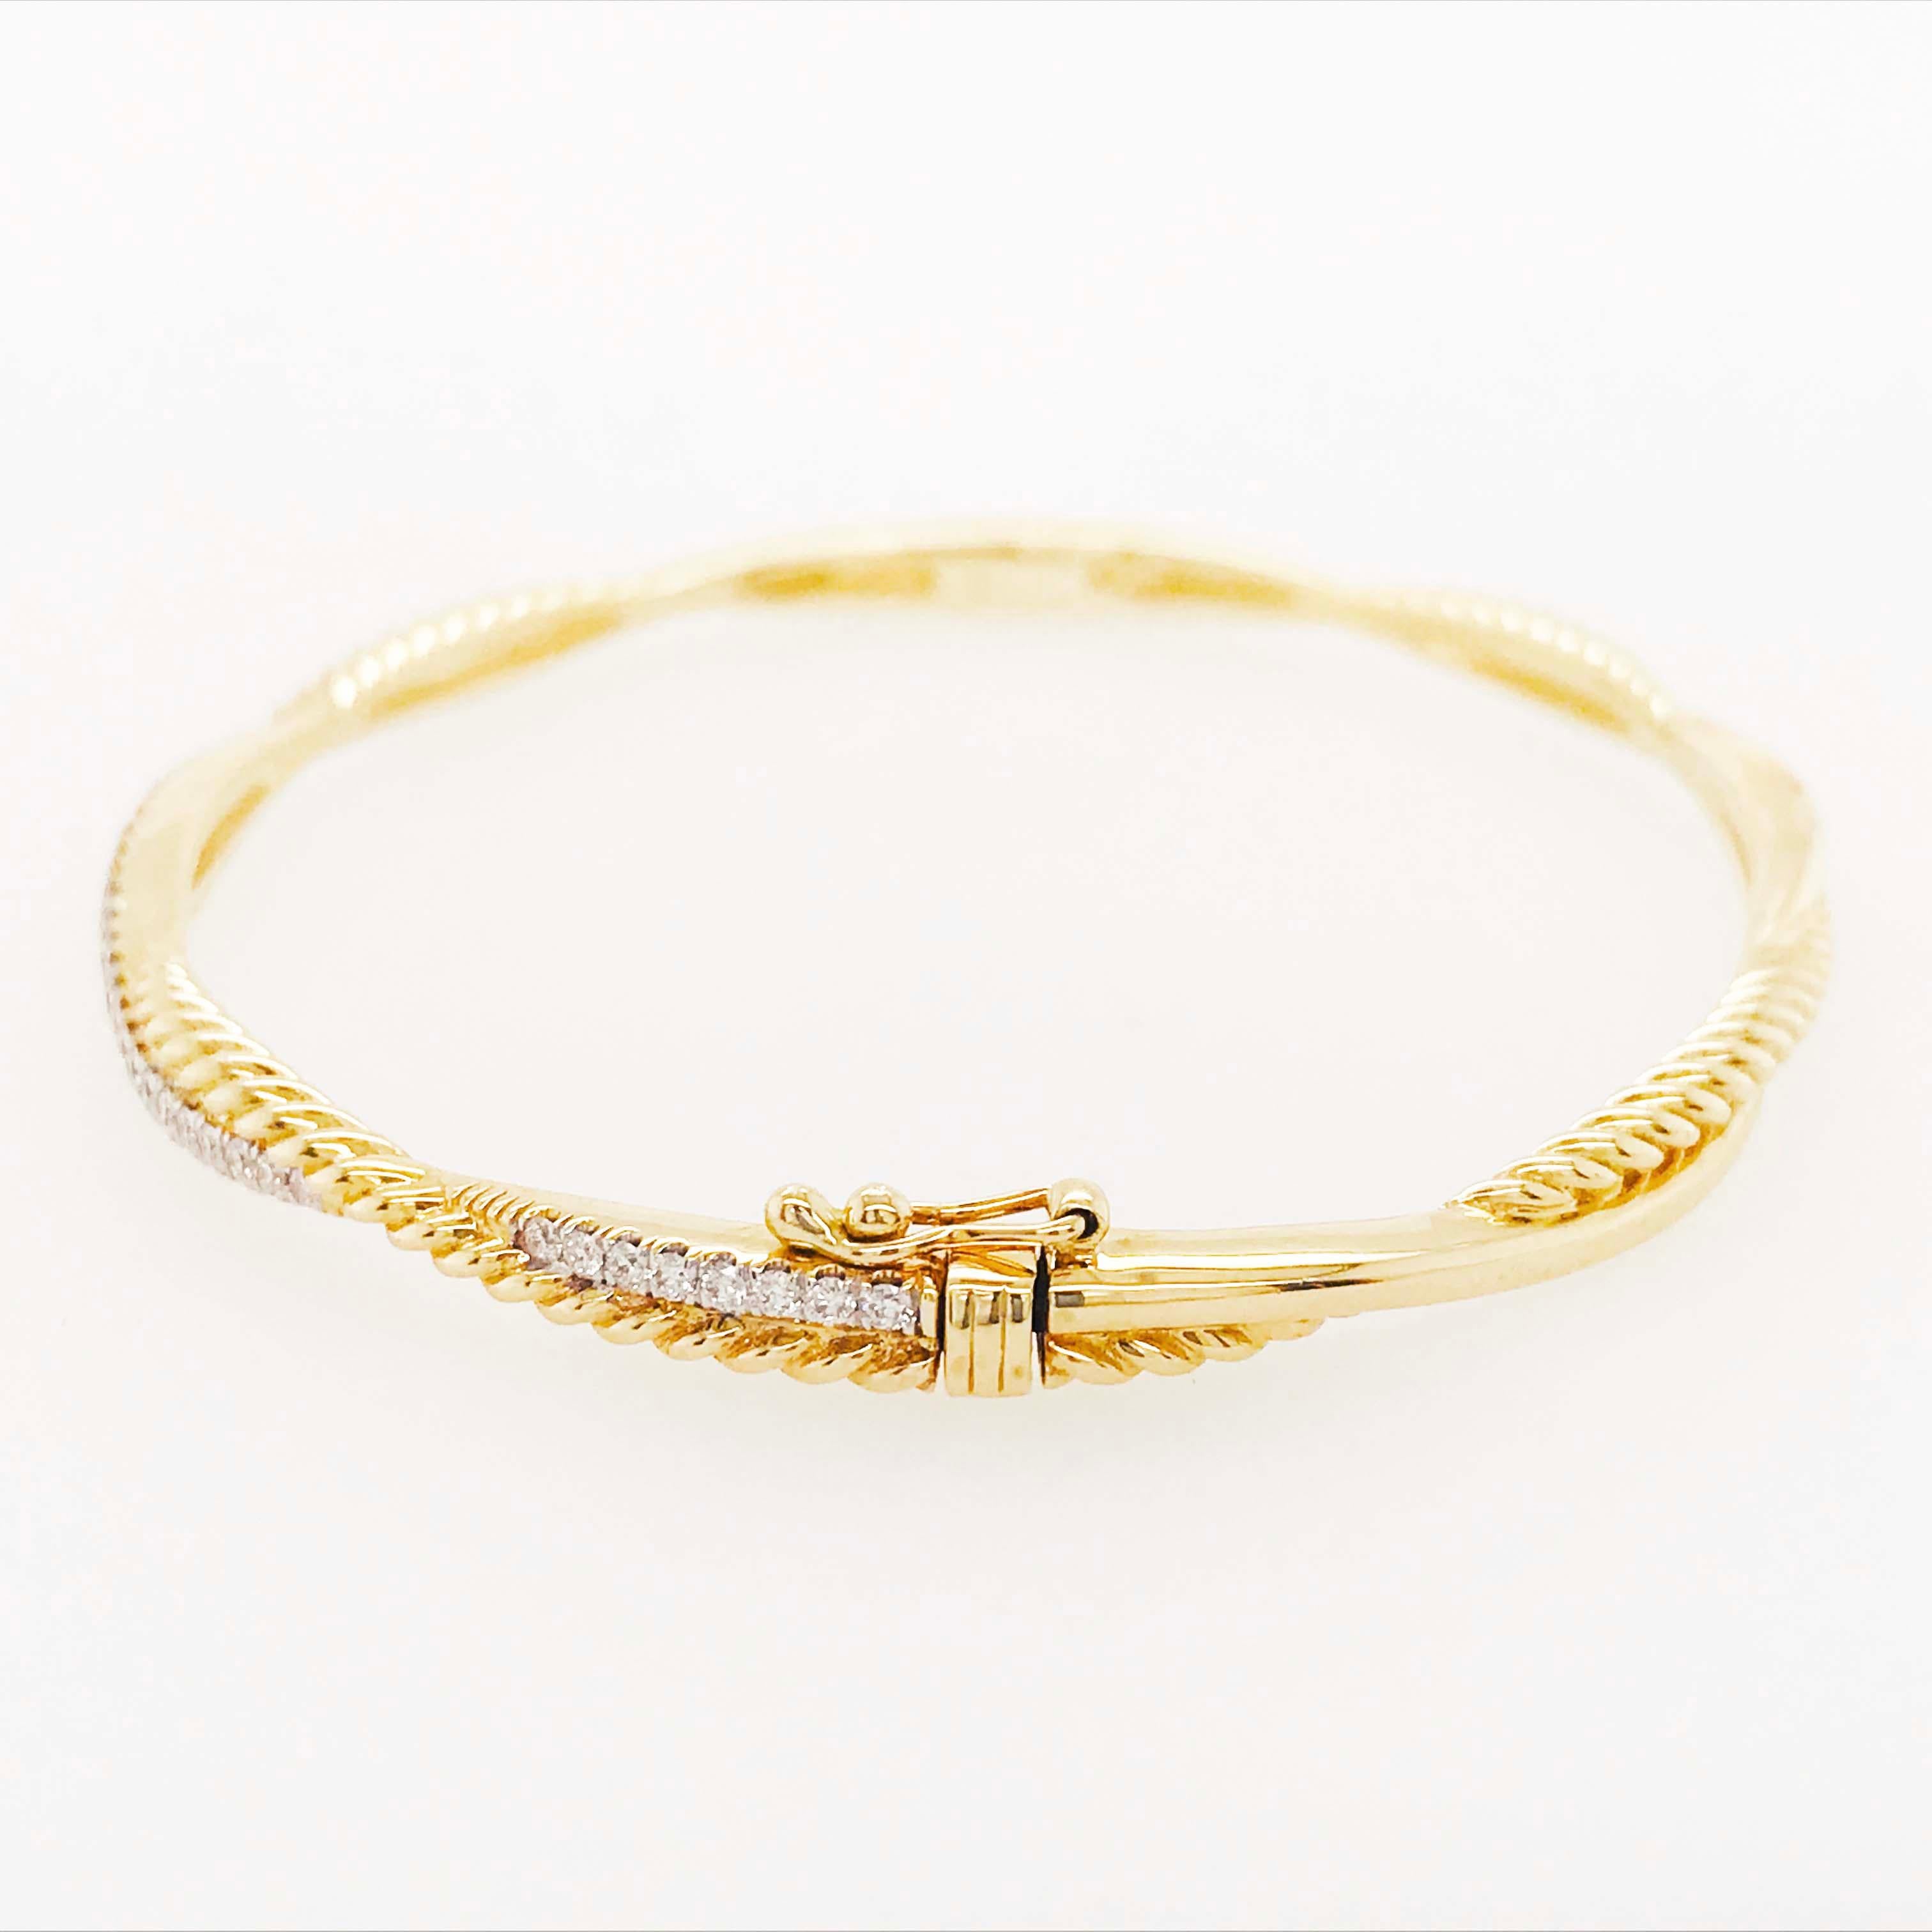 Round Cut Bangle Tennis Bracelet a Twist of Diamonds and Rope Design in 14 Karat Gold For Sale